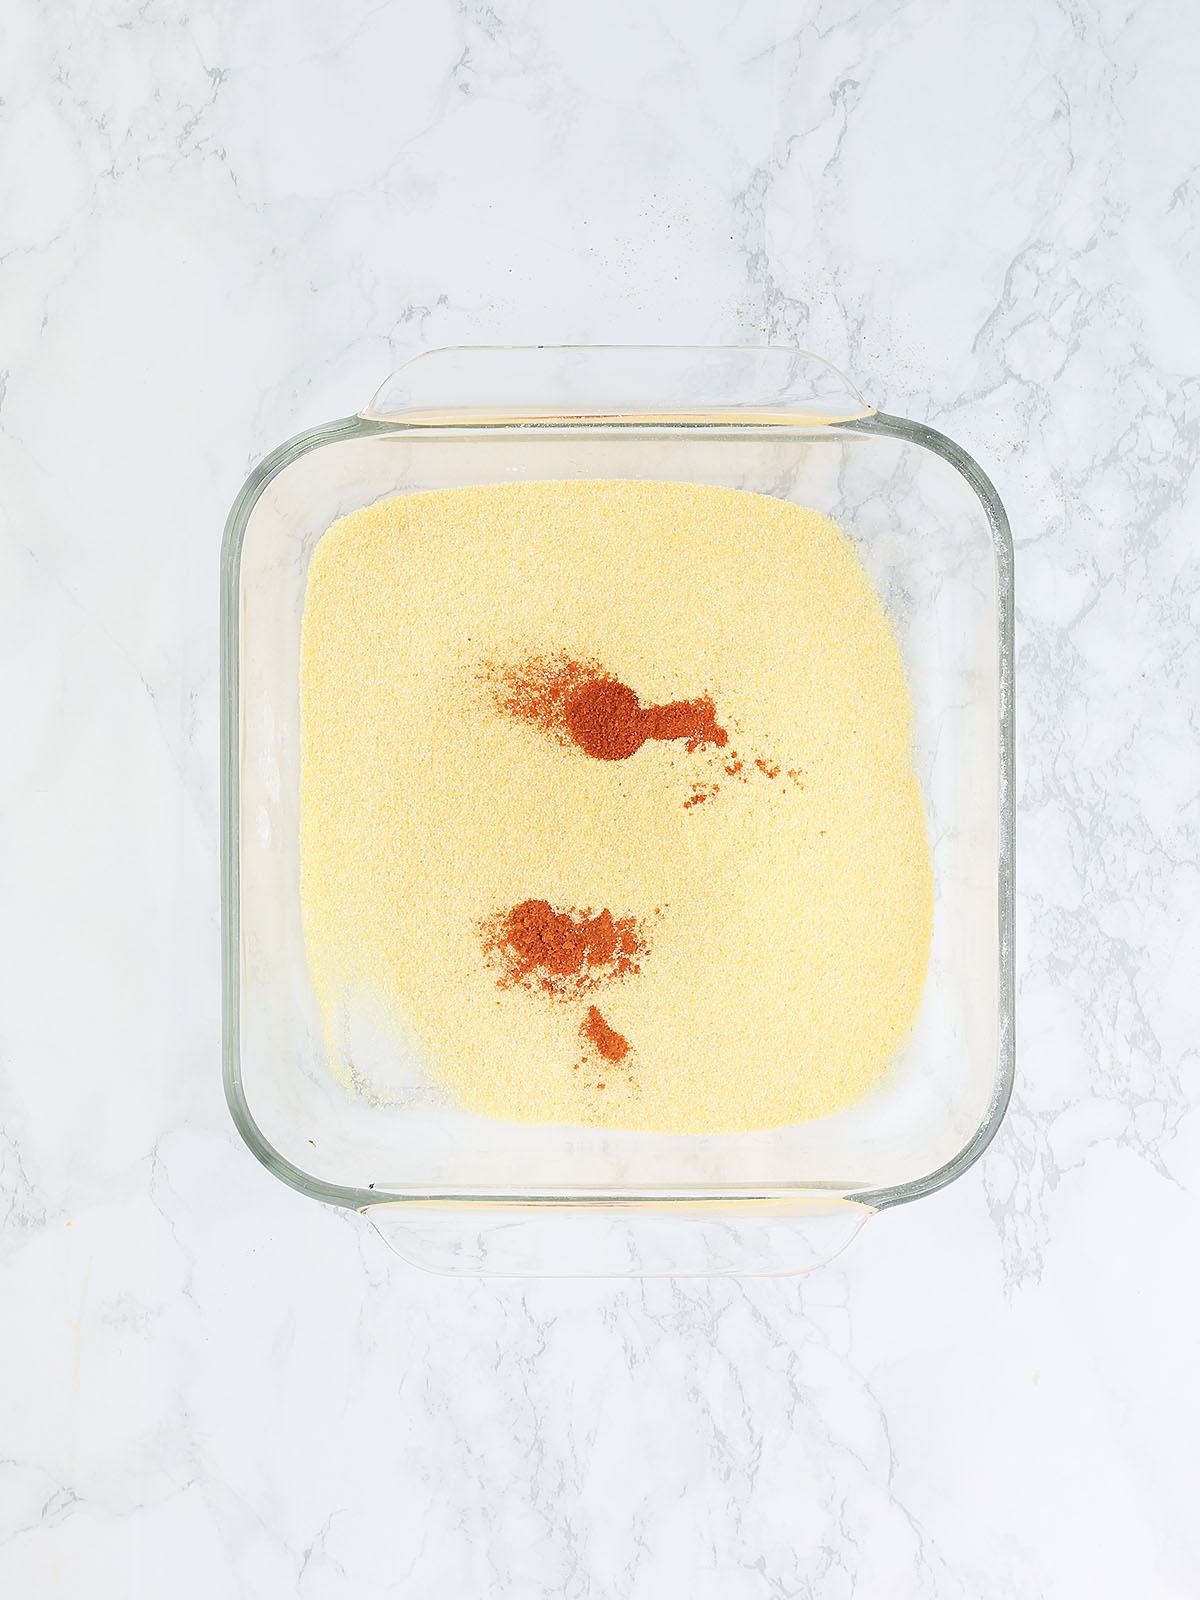 cornmeal and paprika in a glass dish